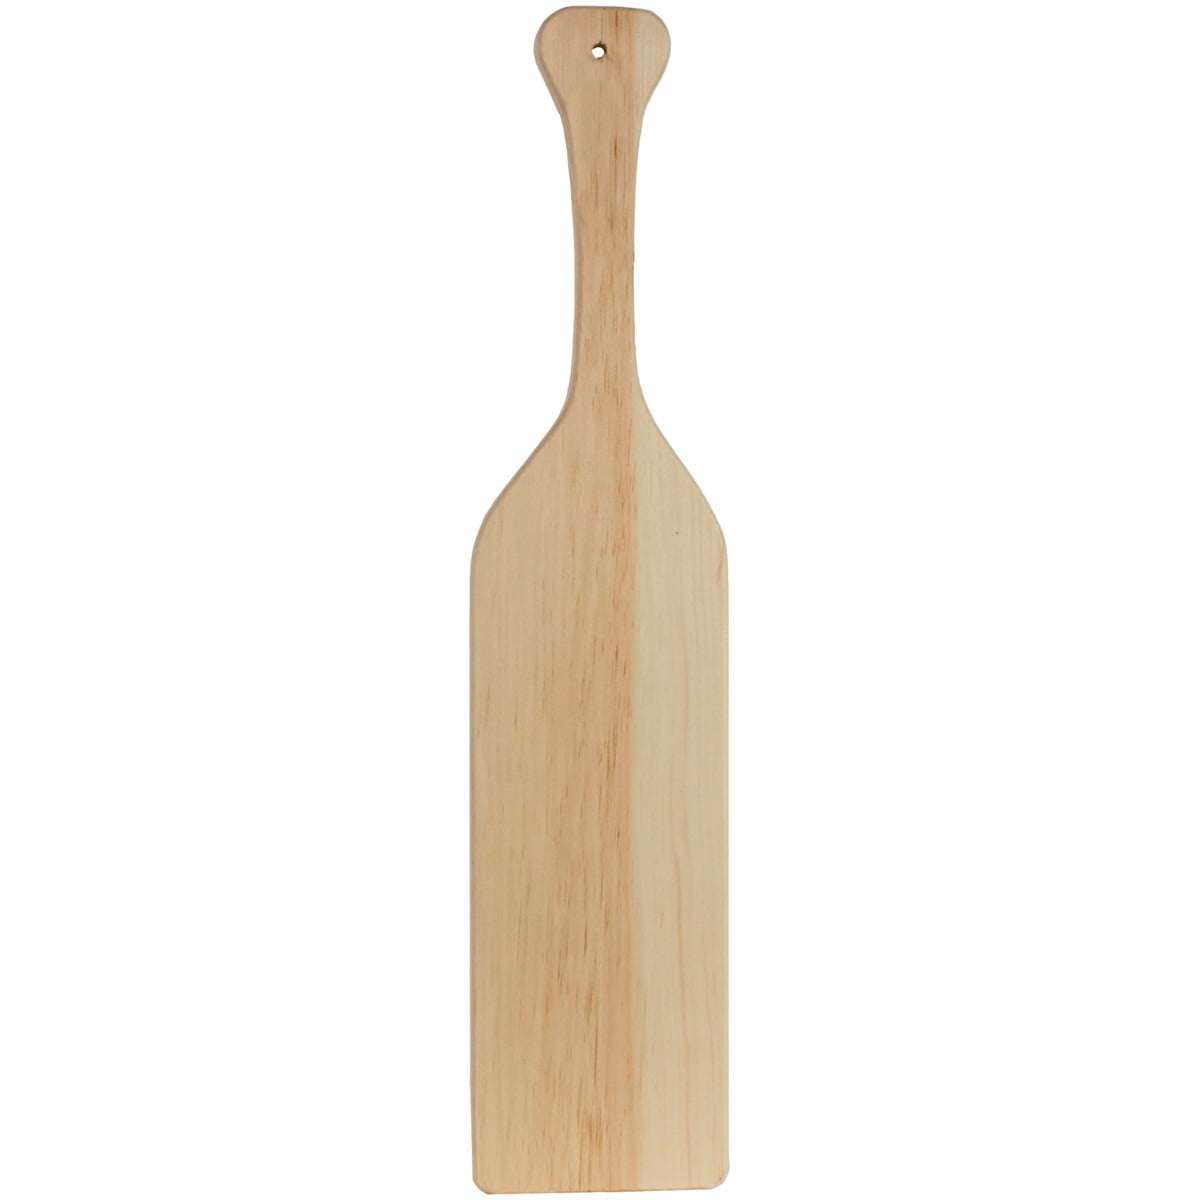 Find Online Greek Paddle Wooden Fraternity Paddles Cutout